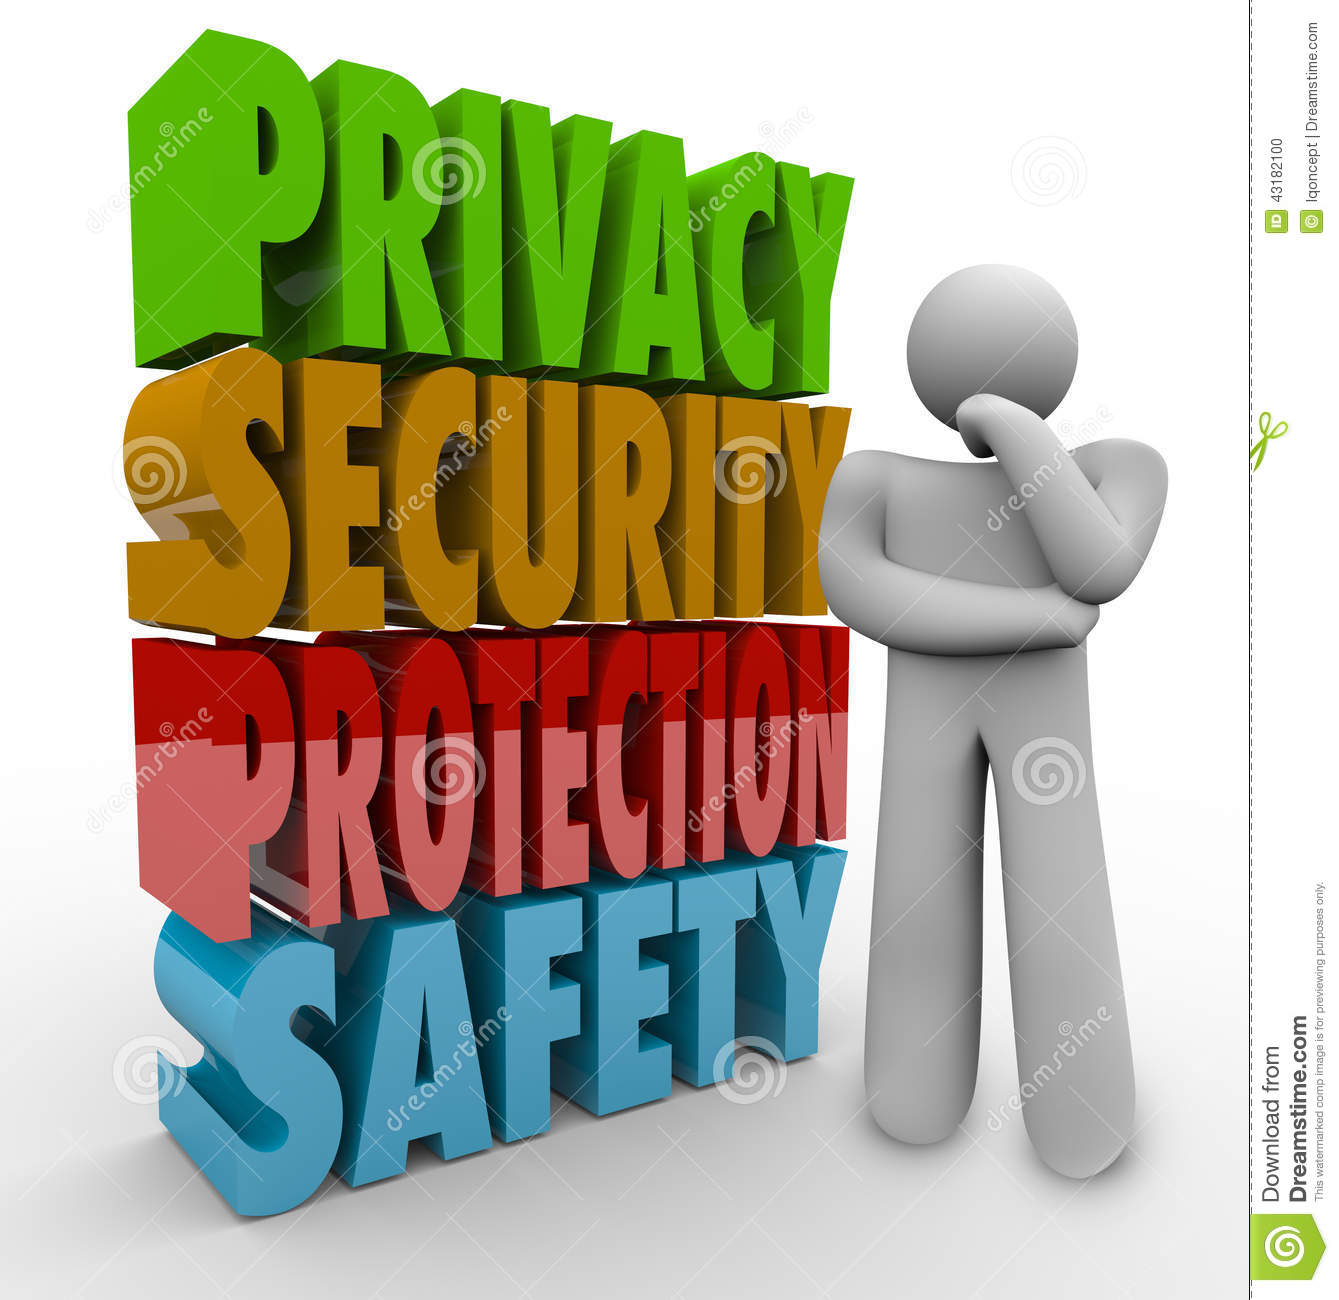 Privacy Security Protection Safety Thinker 3d Words Stock Illustration